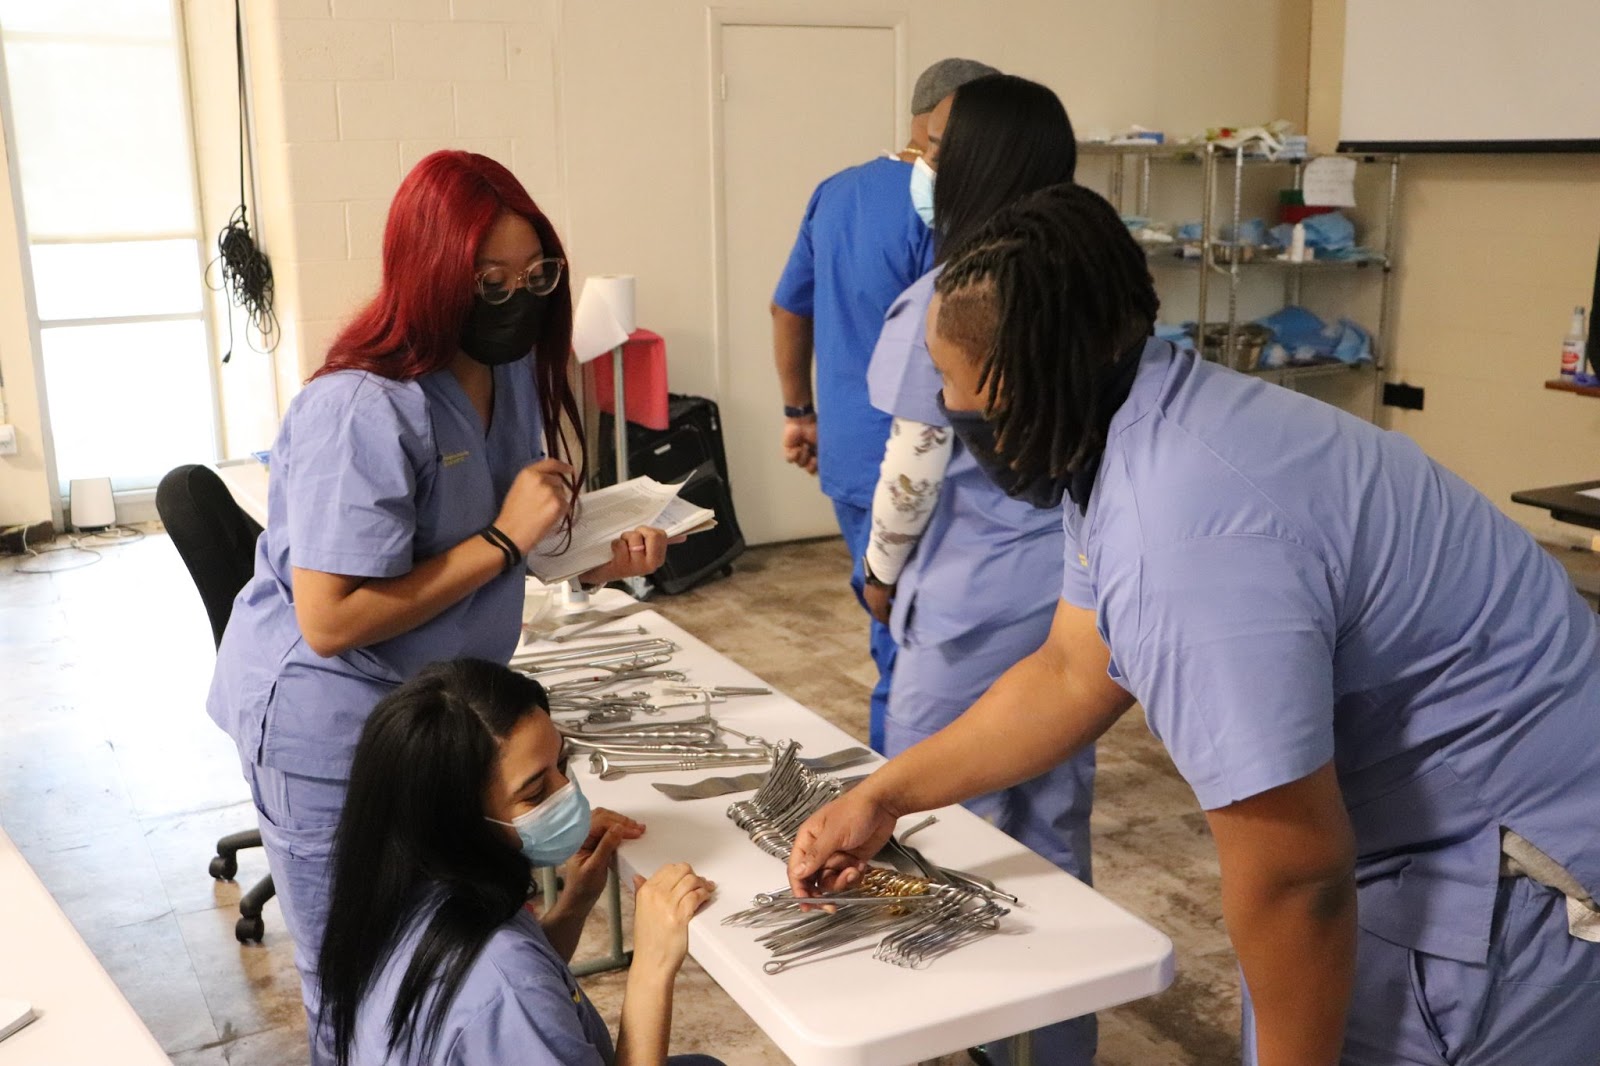 Learning sterile services and growing together is our belief at Philadelphia Technician Training Institute